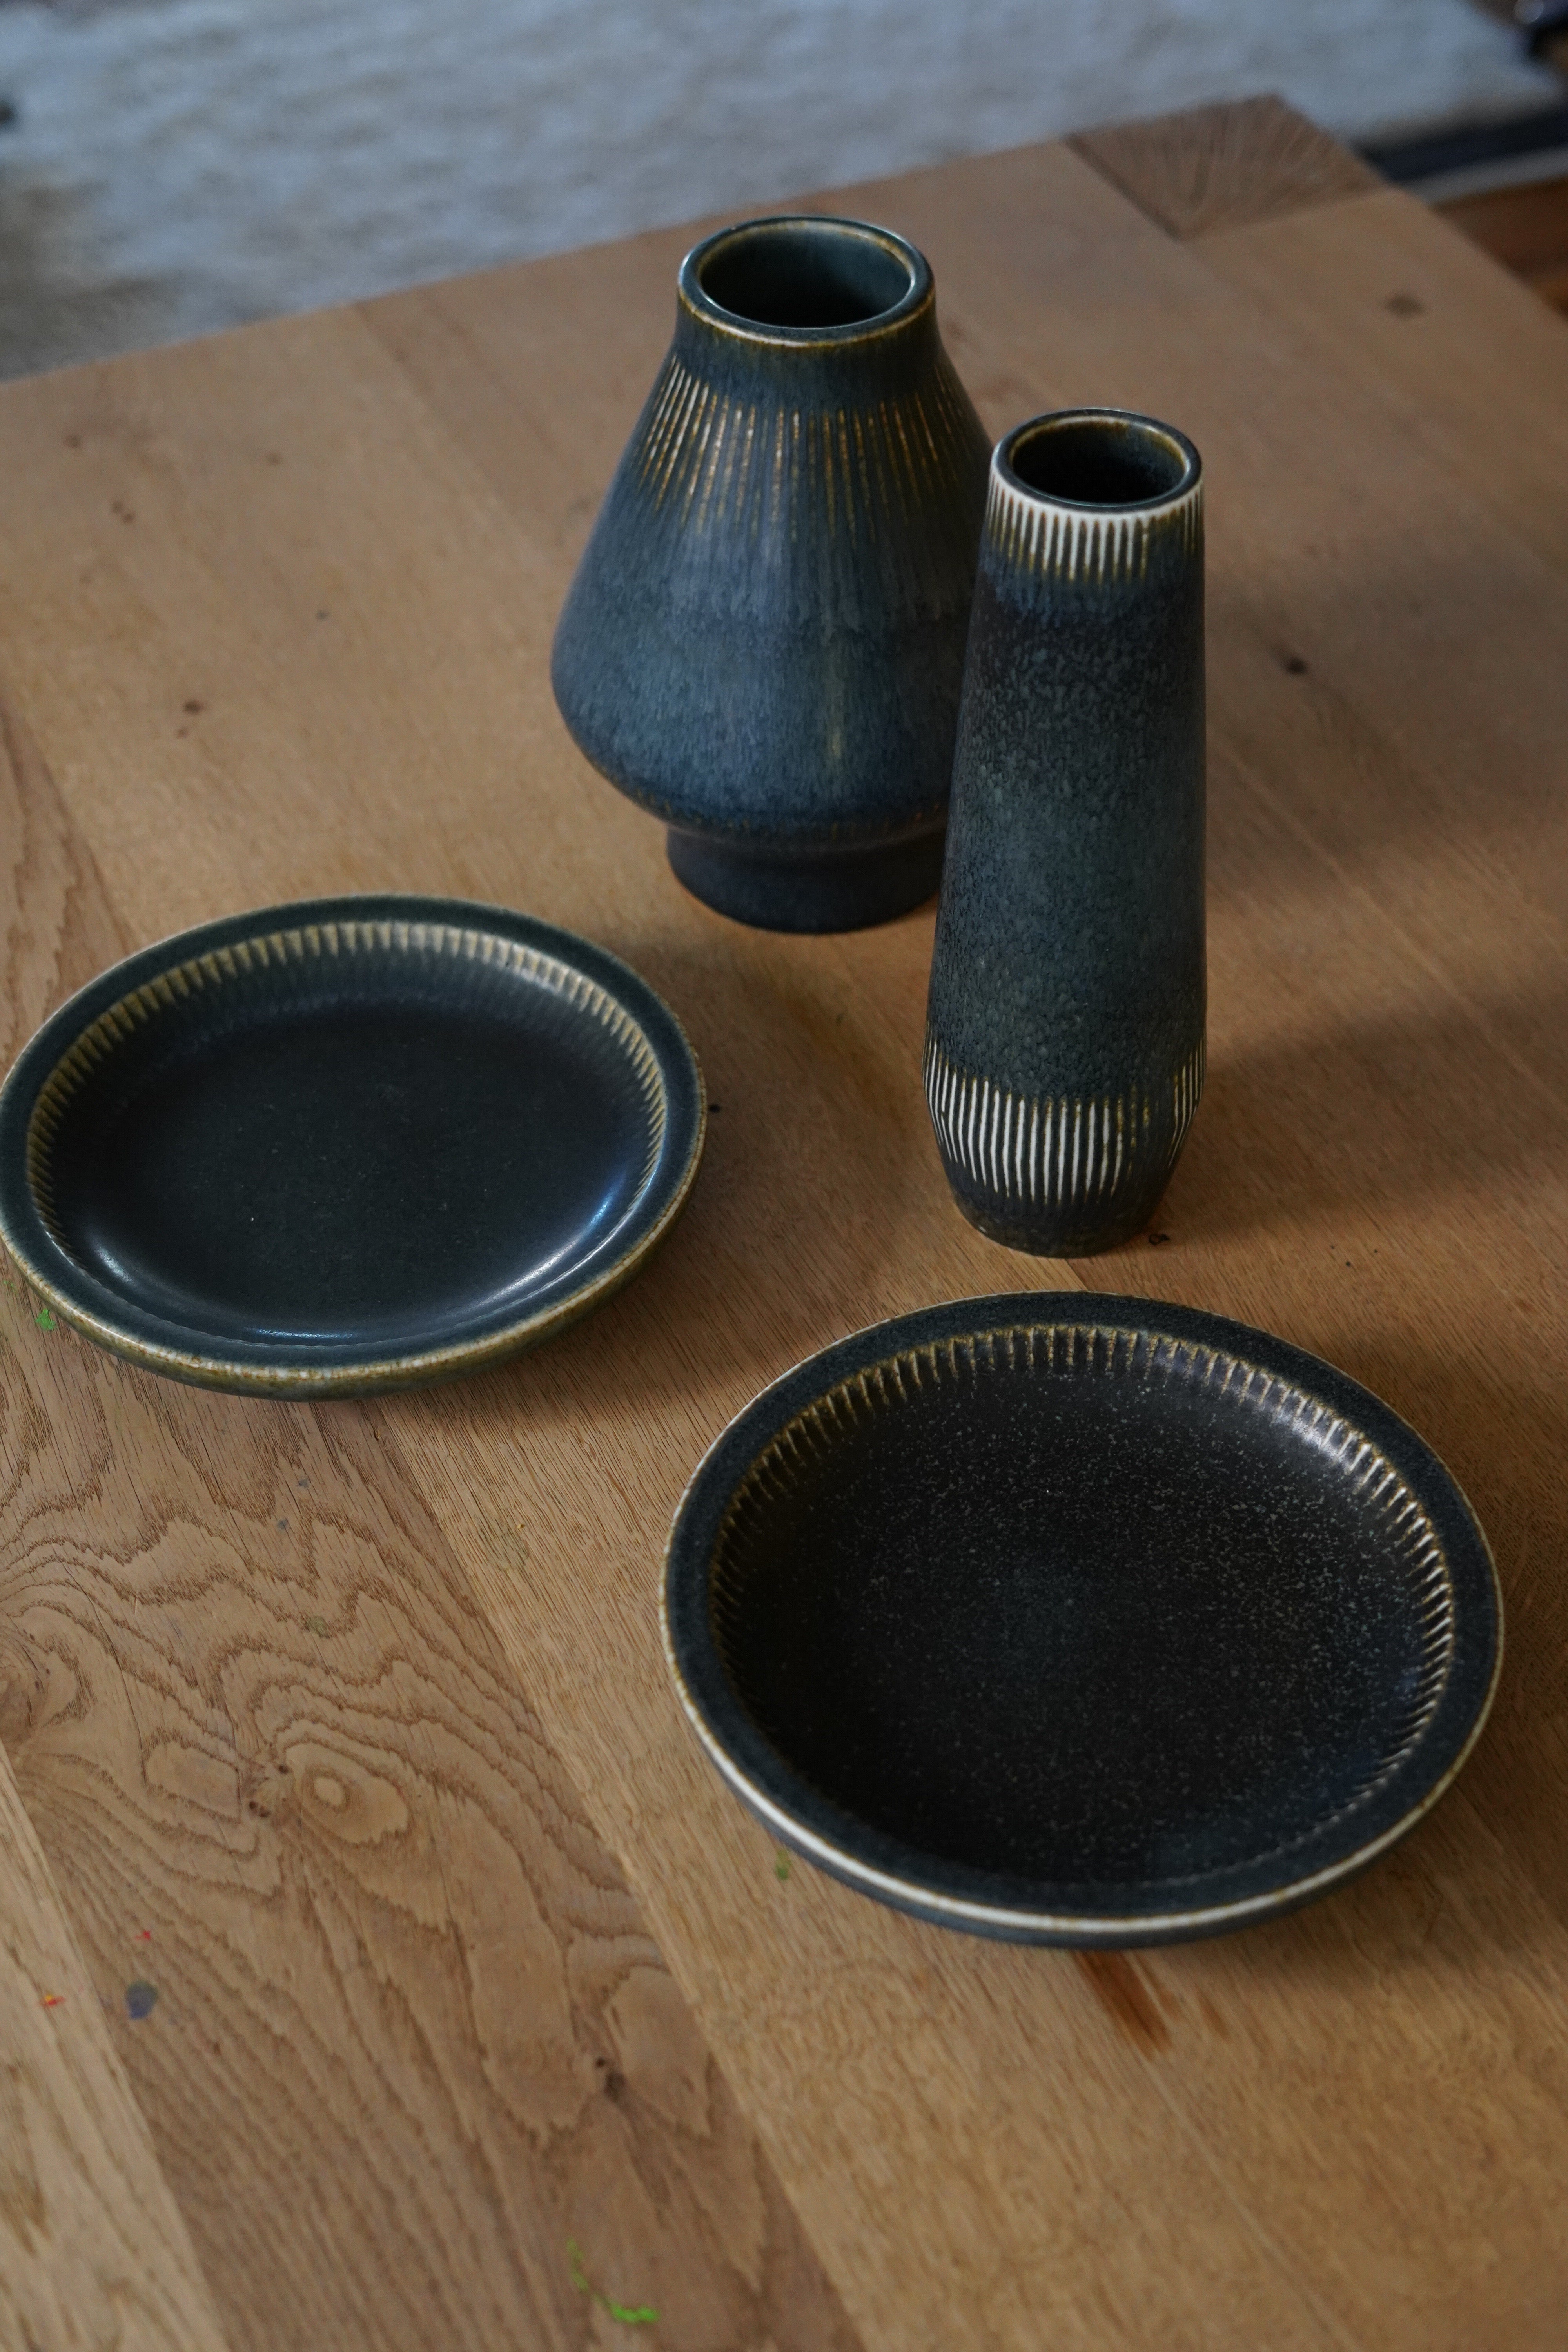 Carl-Harry Stålhane for Rörstrand  dark blue ceramic trays Sweden, 1960.
Set of two trays and two vases in a blue/grey glaze
Vases 9.5